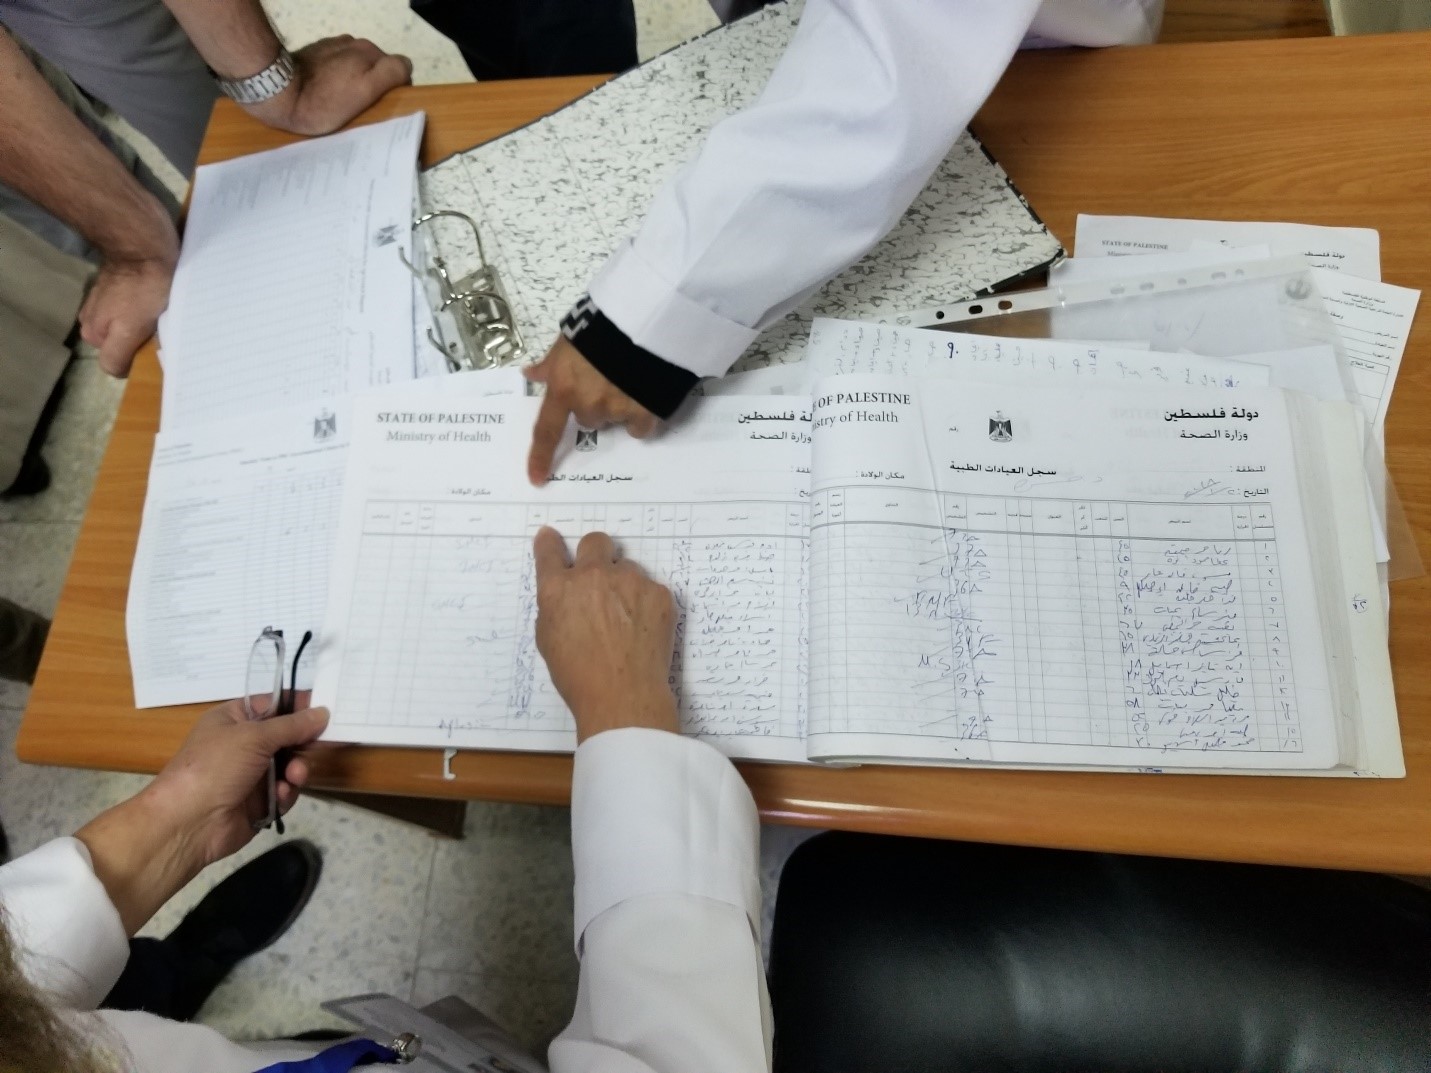 Palestinian Ministry of Health case log book